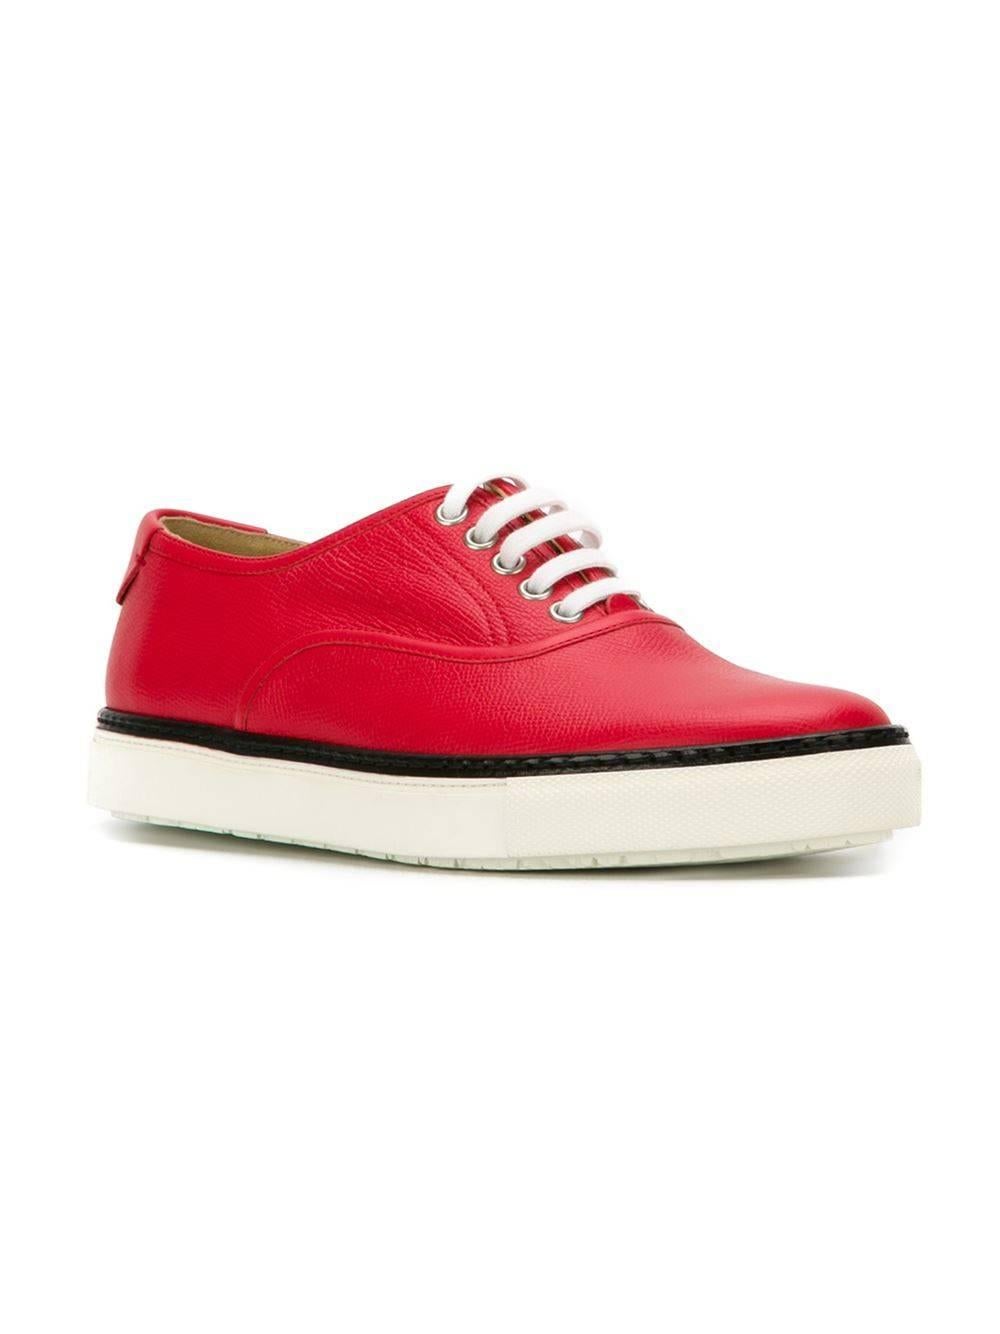 Red leather colour block low-top sneakers featuring an almond toe, a contrast piped trim, a brand embossed insole, a lace-up front fastening, a flat rubber sole and a back embossed logo stamp. 

Colour: Red

Material: Leather